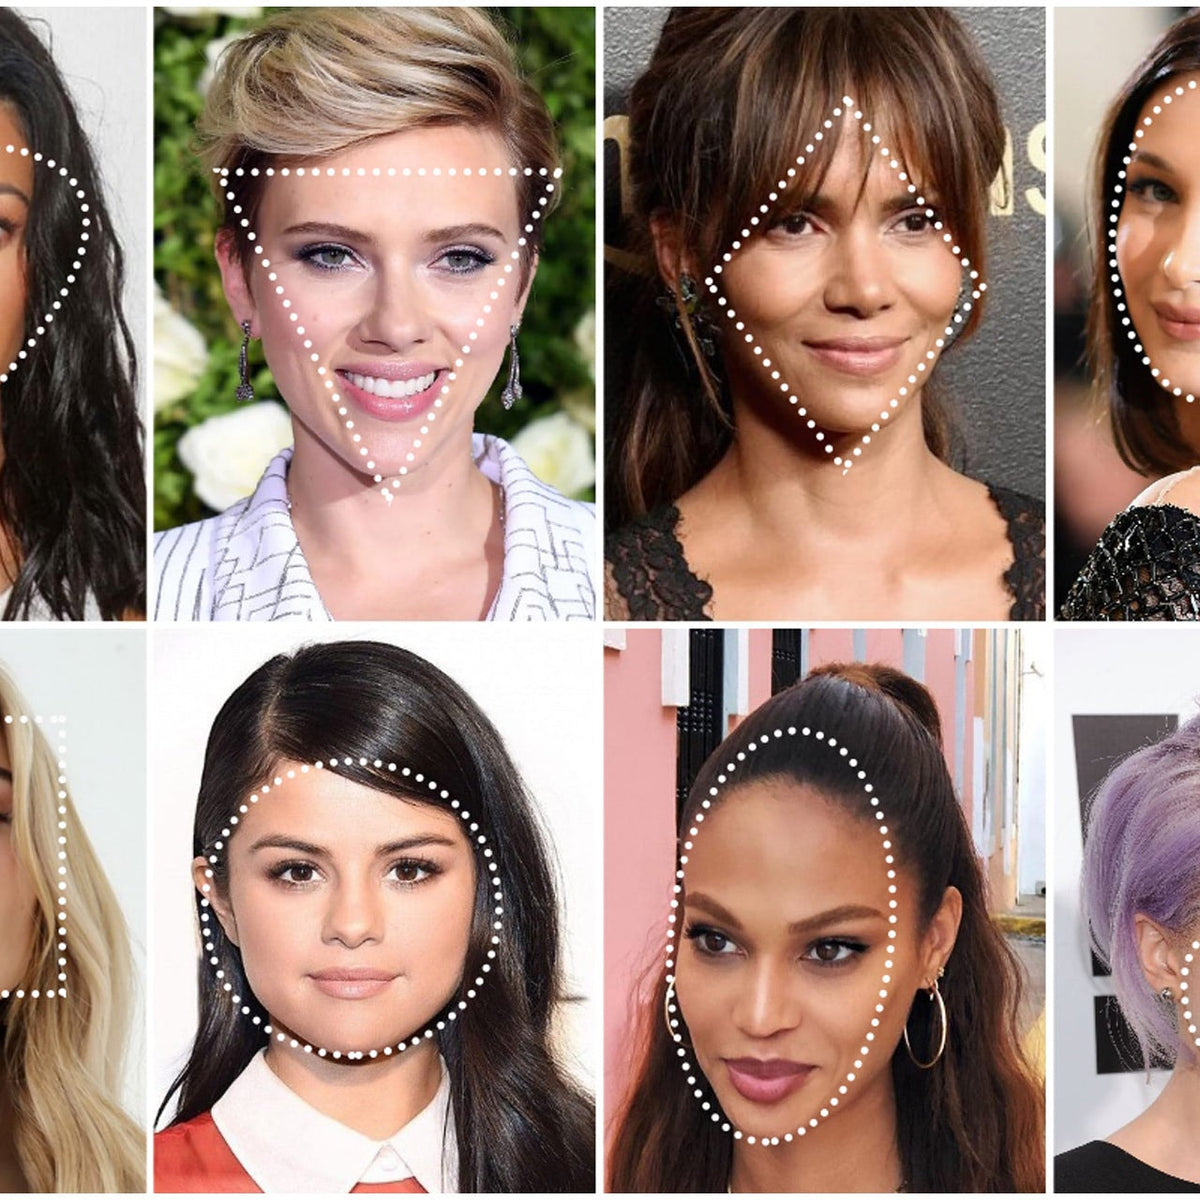 The Best Oval Face Haircuts | The Everygirl